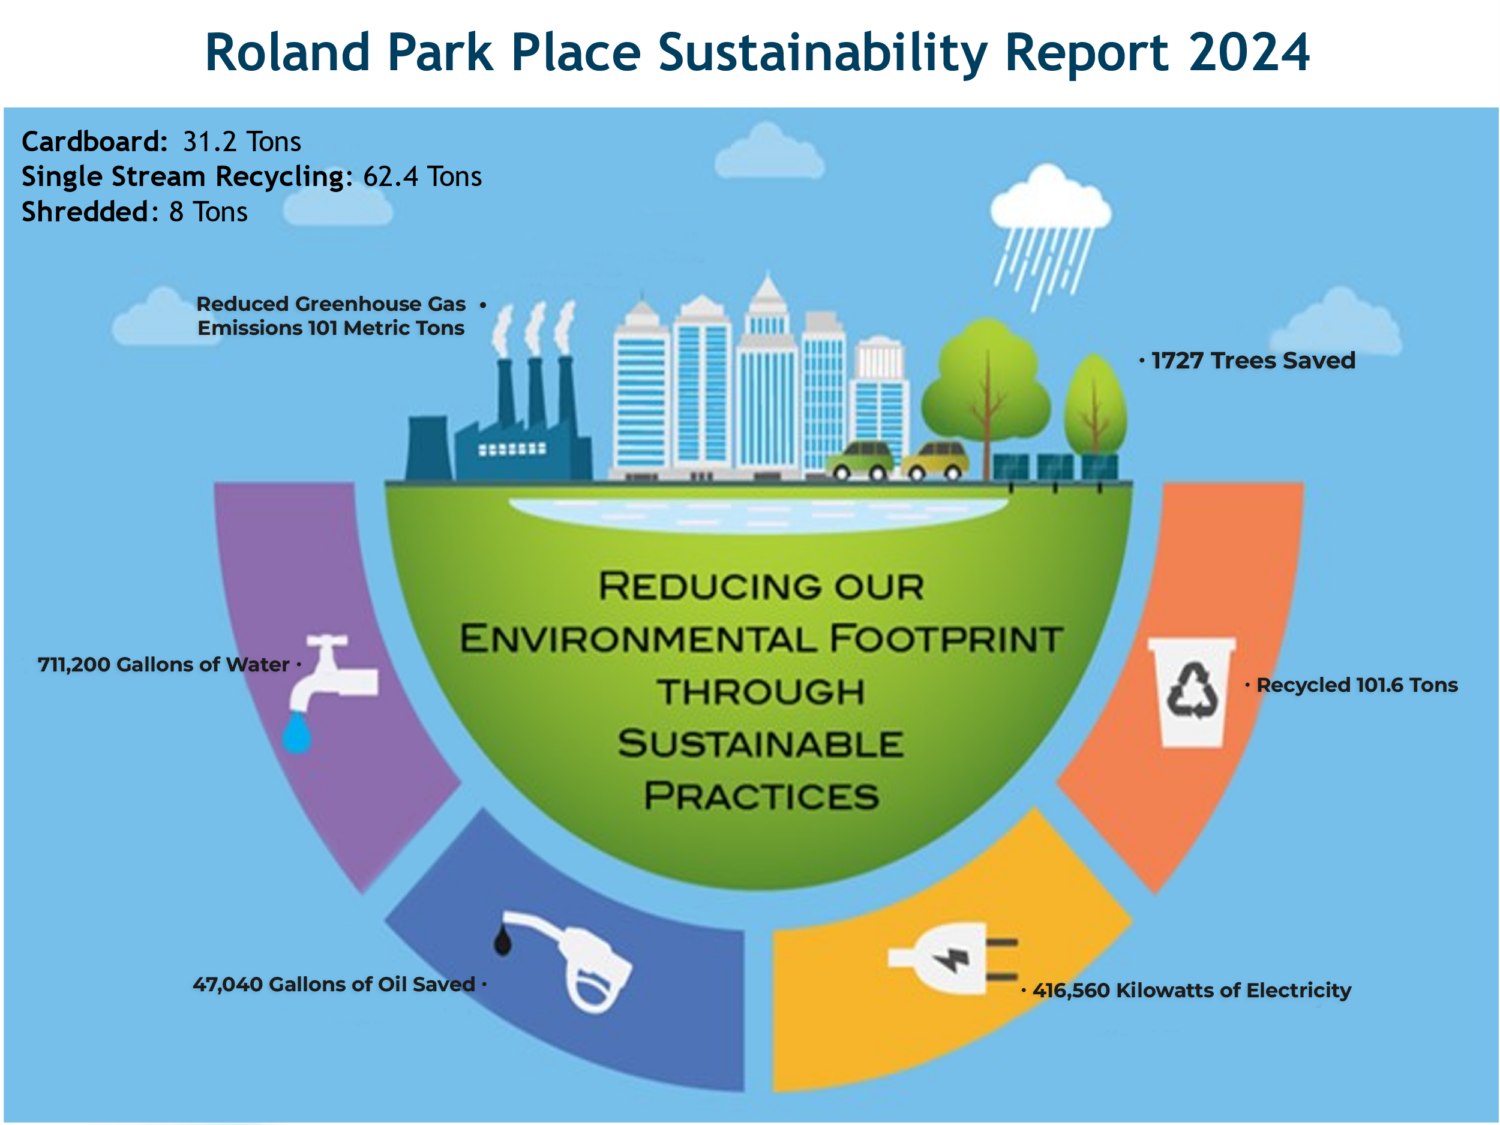 Roland Park Place Sustainability Report 2024Reducing our environmental footprint through sustainable practicesCardboard: 31.2 TonsSingle Stream Recycling: 62.4 TonsShredded: 8 TonsReduced Greenhouse Gas Emissions 101 Metric Tons1727 Trees Saved711,200 Gallons of Water47,040 Gallons of Oil Saved416,560 Kilowatts of ElectricityRecycled 101.6 Tons